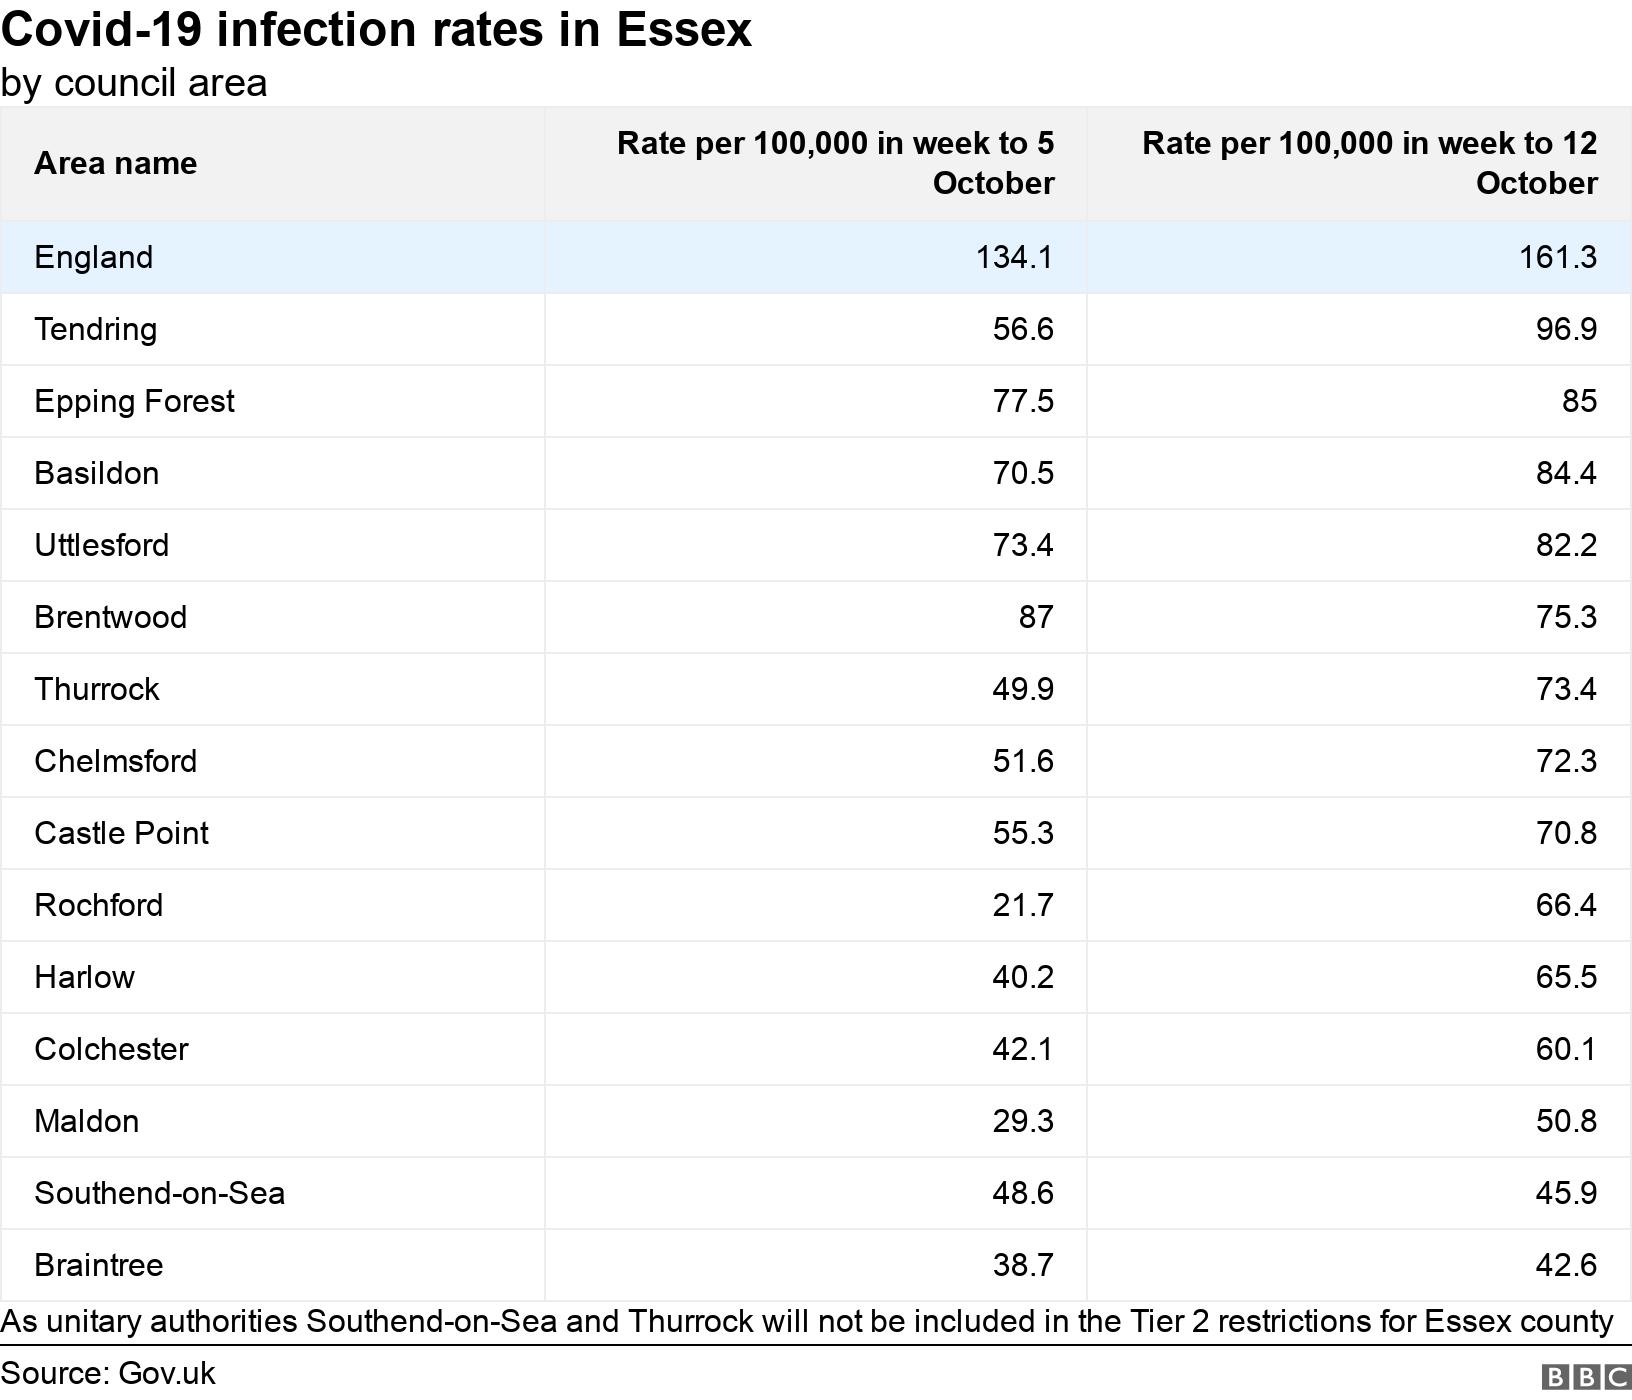 Covid-19 infection rates in Essex. by council area. As unitary authorities Southend-on-Sea and Thurrock will not be included in the Tier 2 restrictions for Essex county.